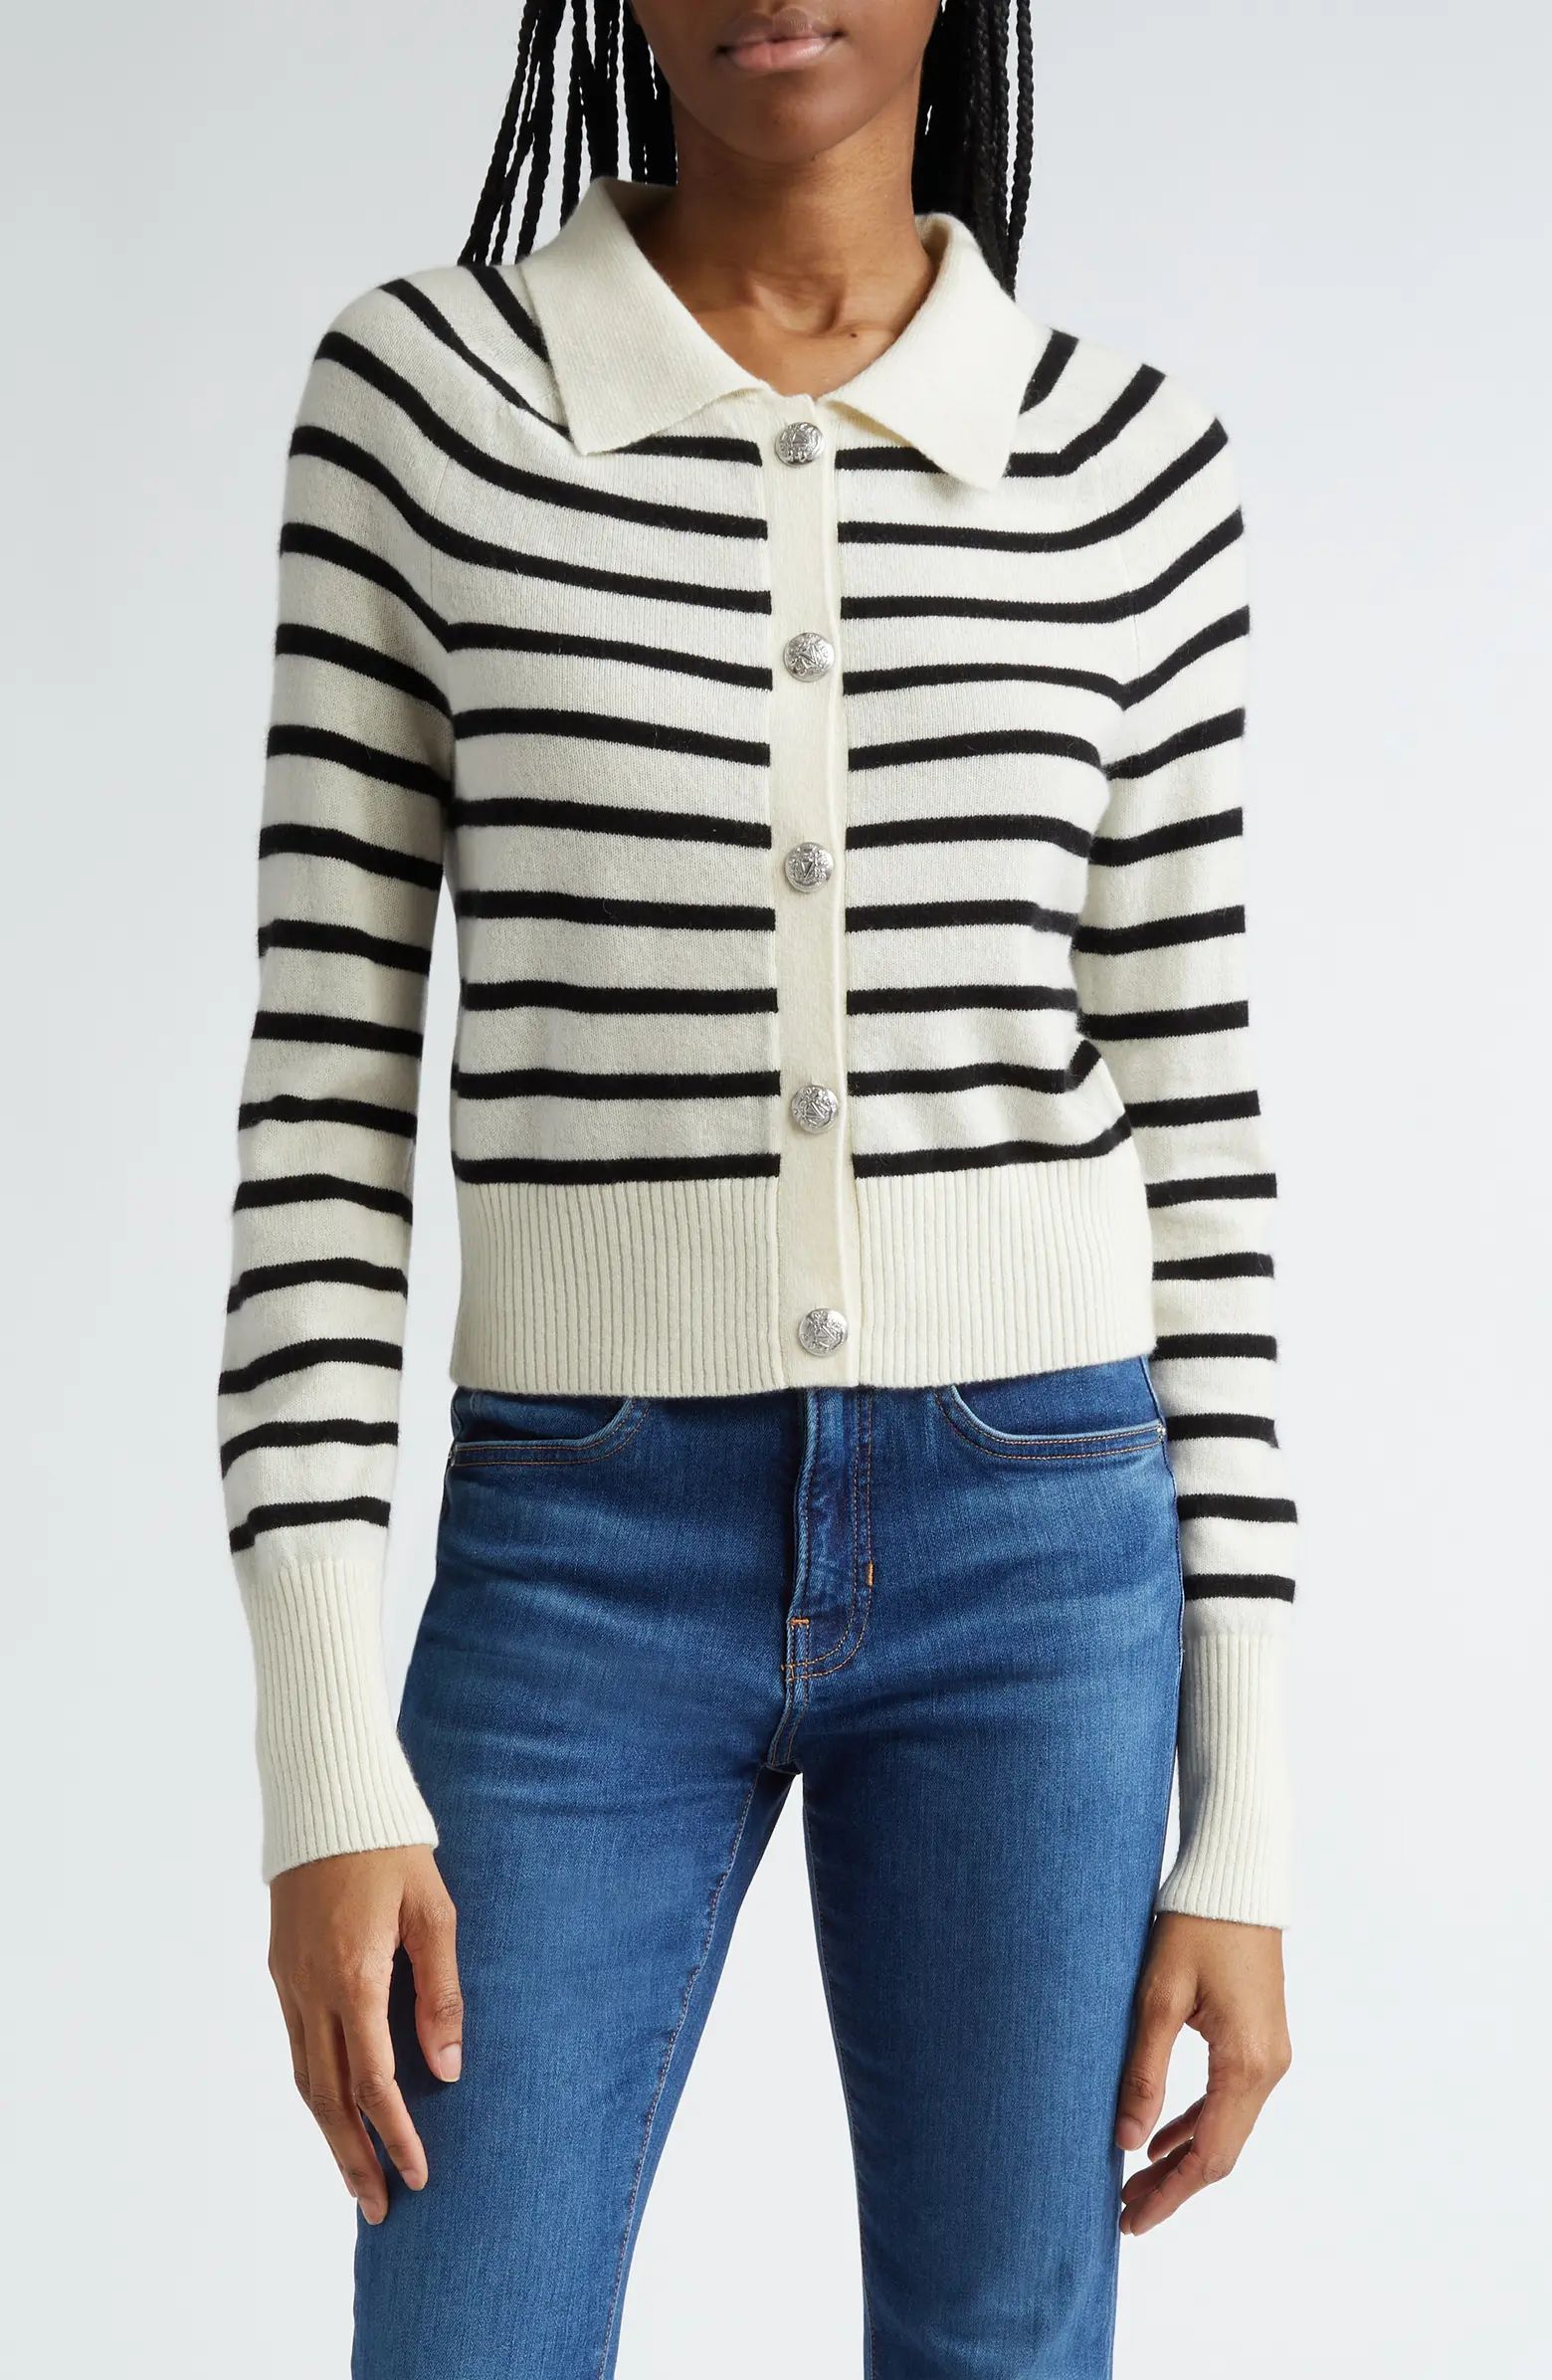 Cheshire Cashmere Cardigan Sweater | Nordstrom